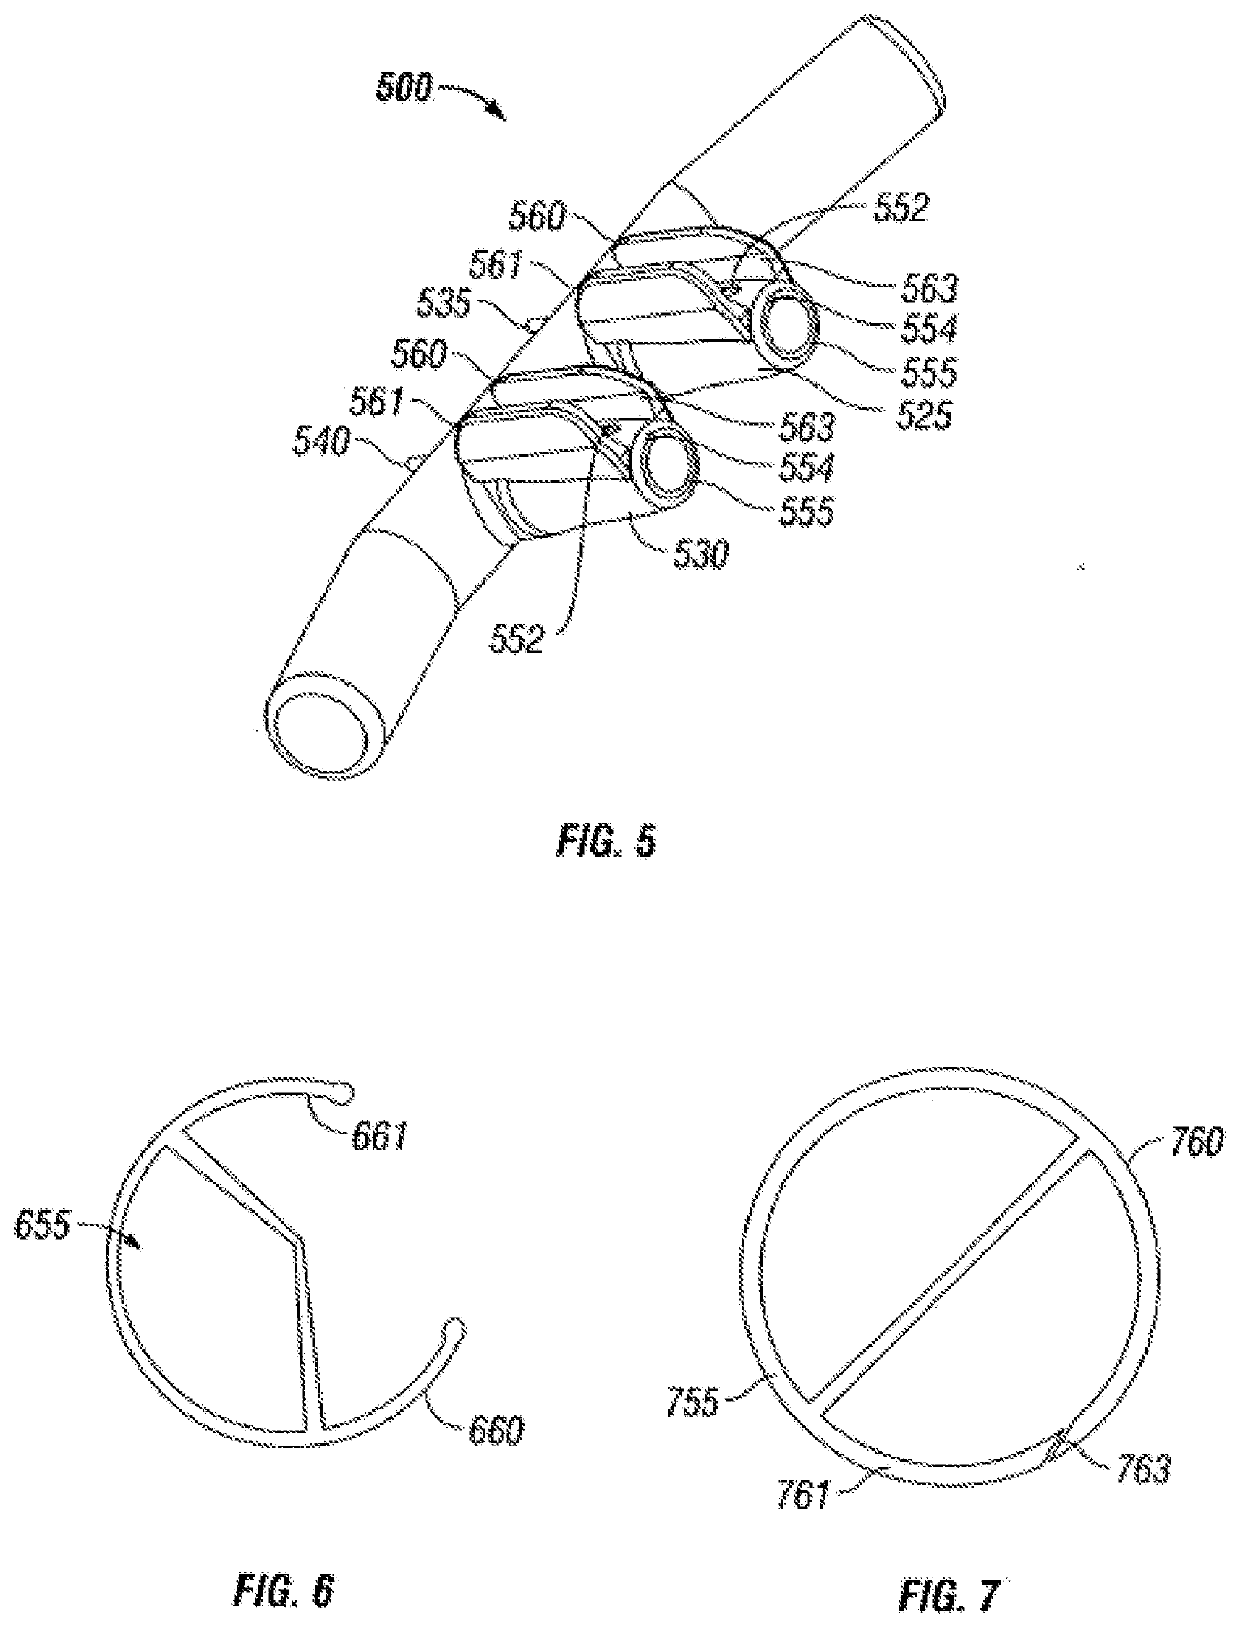 High flow therapy device utilizing a non-sealing respiratory interface and related methods